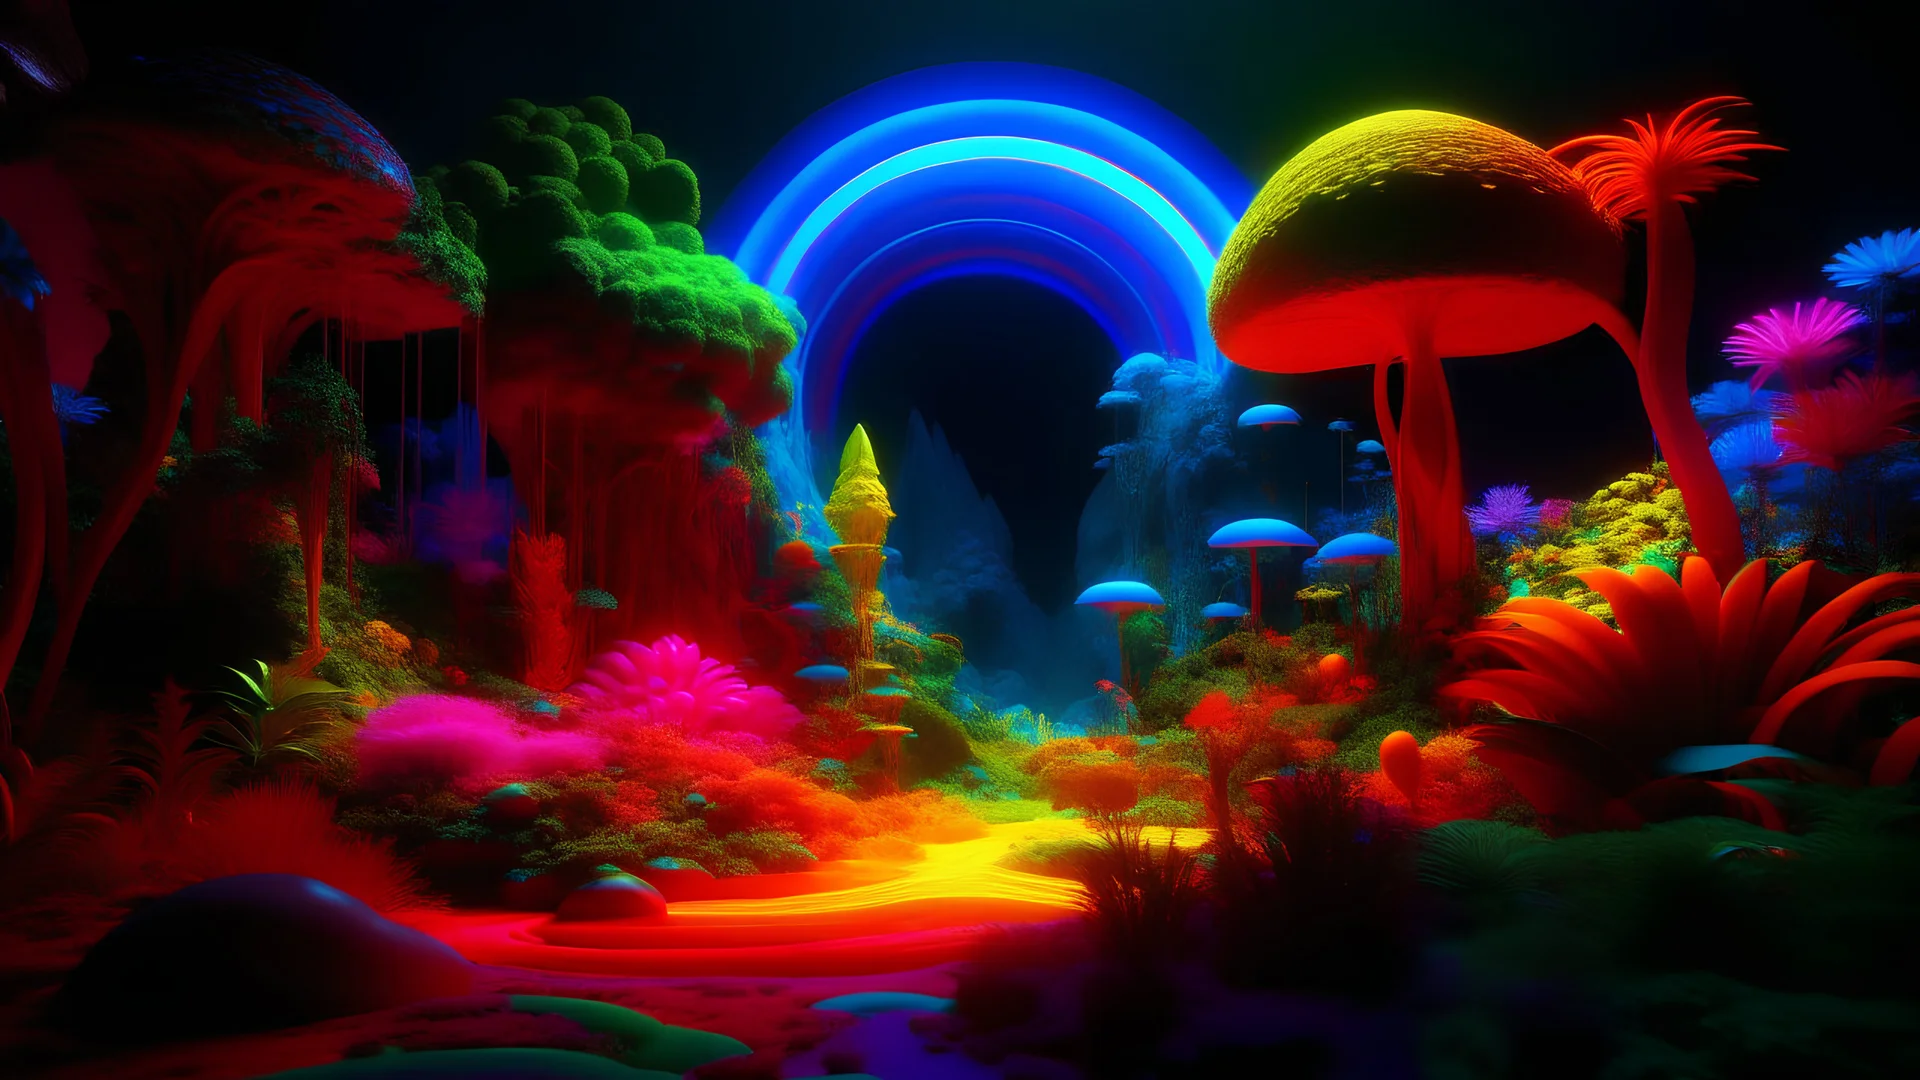 A rainbow-colored quantum lands on Pandora, its bold and thick neon colors illuminating the lush landscape. The vibrant hues dance across the flora and fauna, creating a surreal and otherworldly atmosphere. As the quantum settles into its new home, it pulses with energy, promising untold possibilities for the planet and its inhabitants.